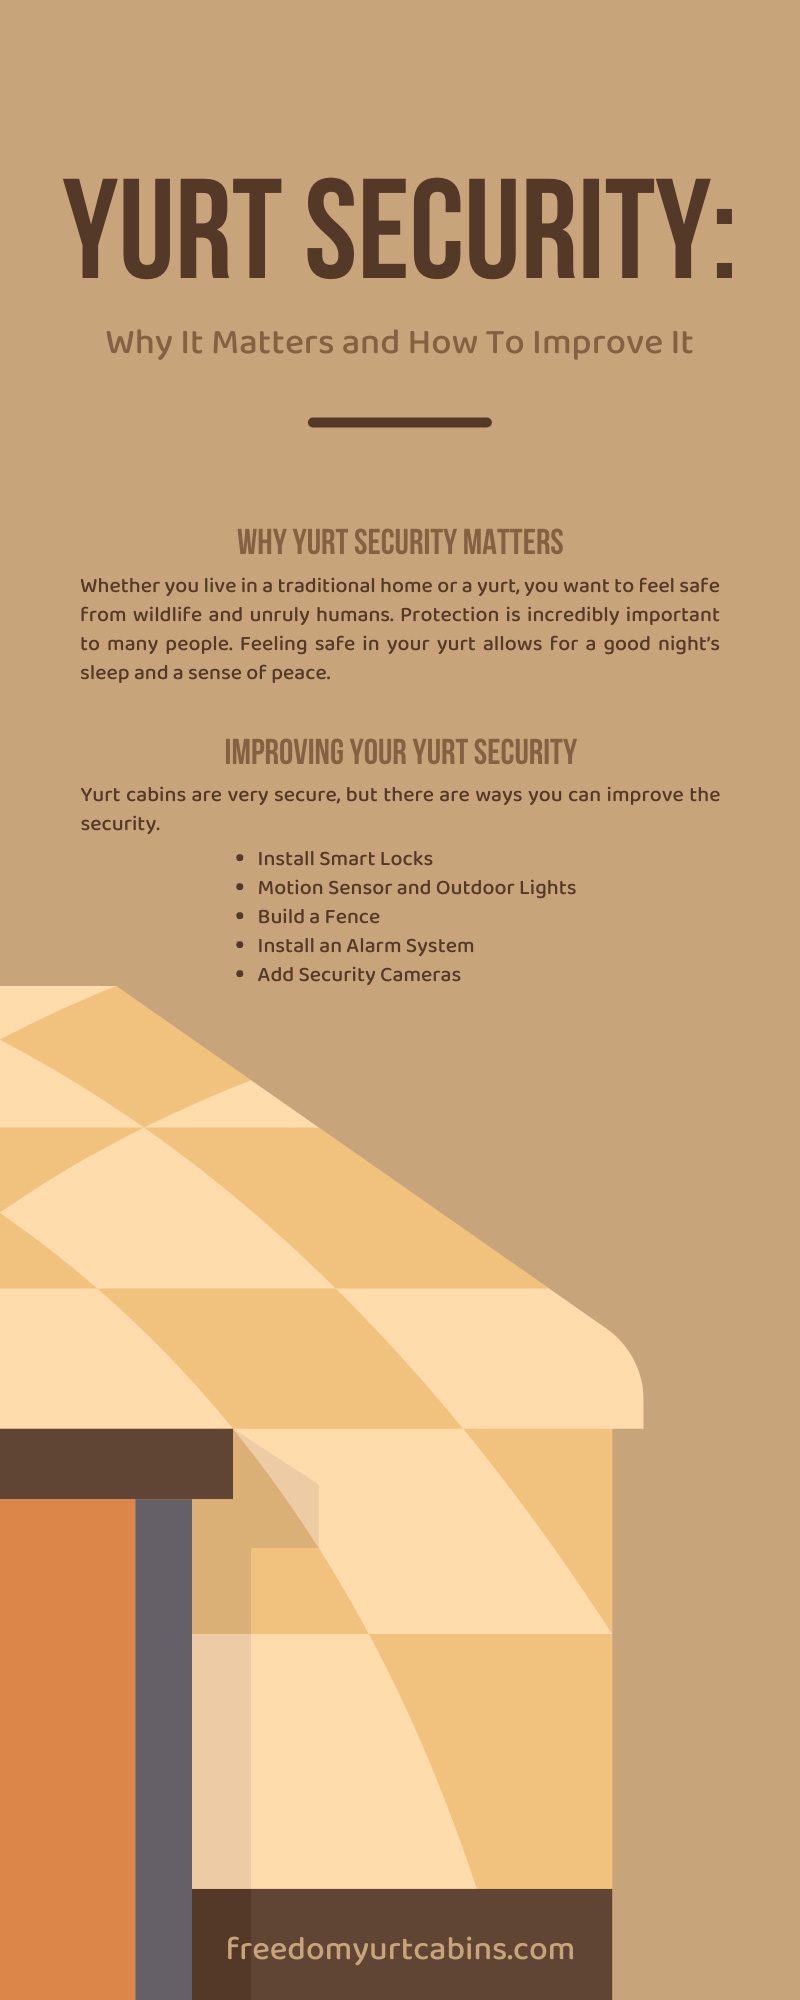 Yurt Security: Why It Matters and How To Improve It